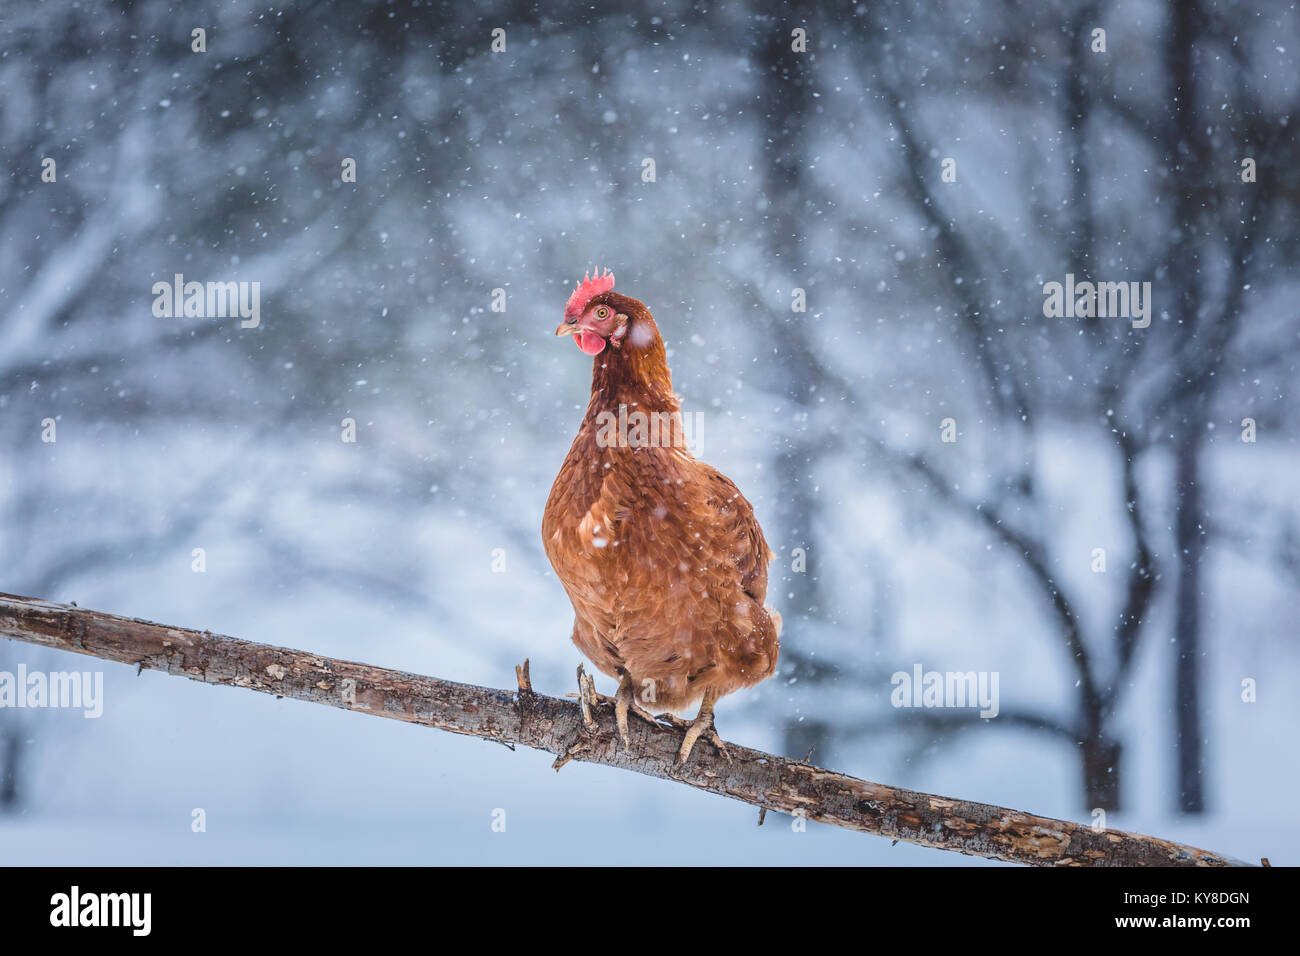 Free Range Domestic Rustic Eggs Chicken on a Wood Branch Outside during Winter Storm. Stock Photo